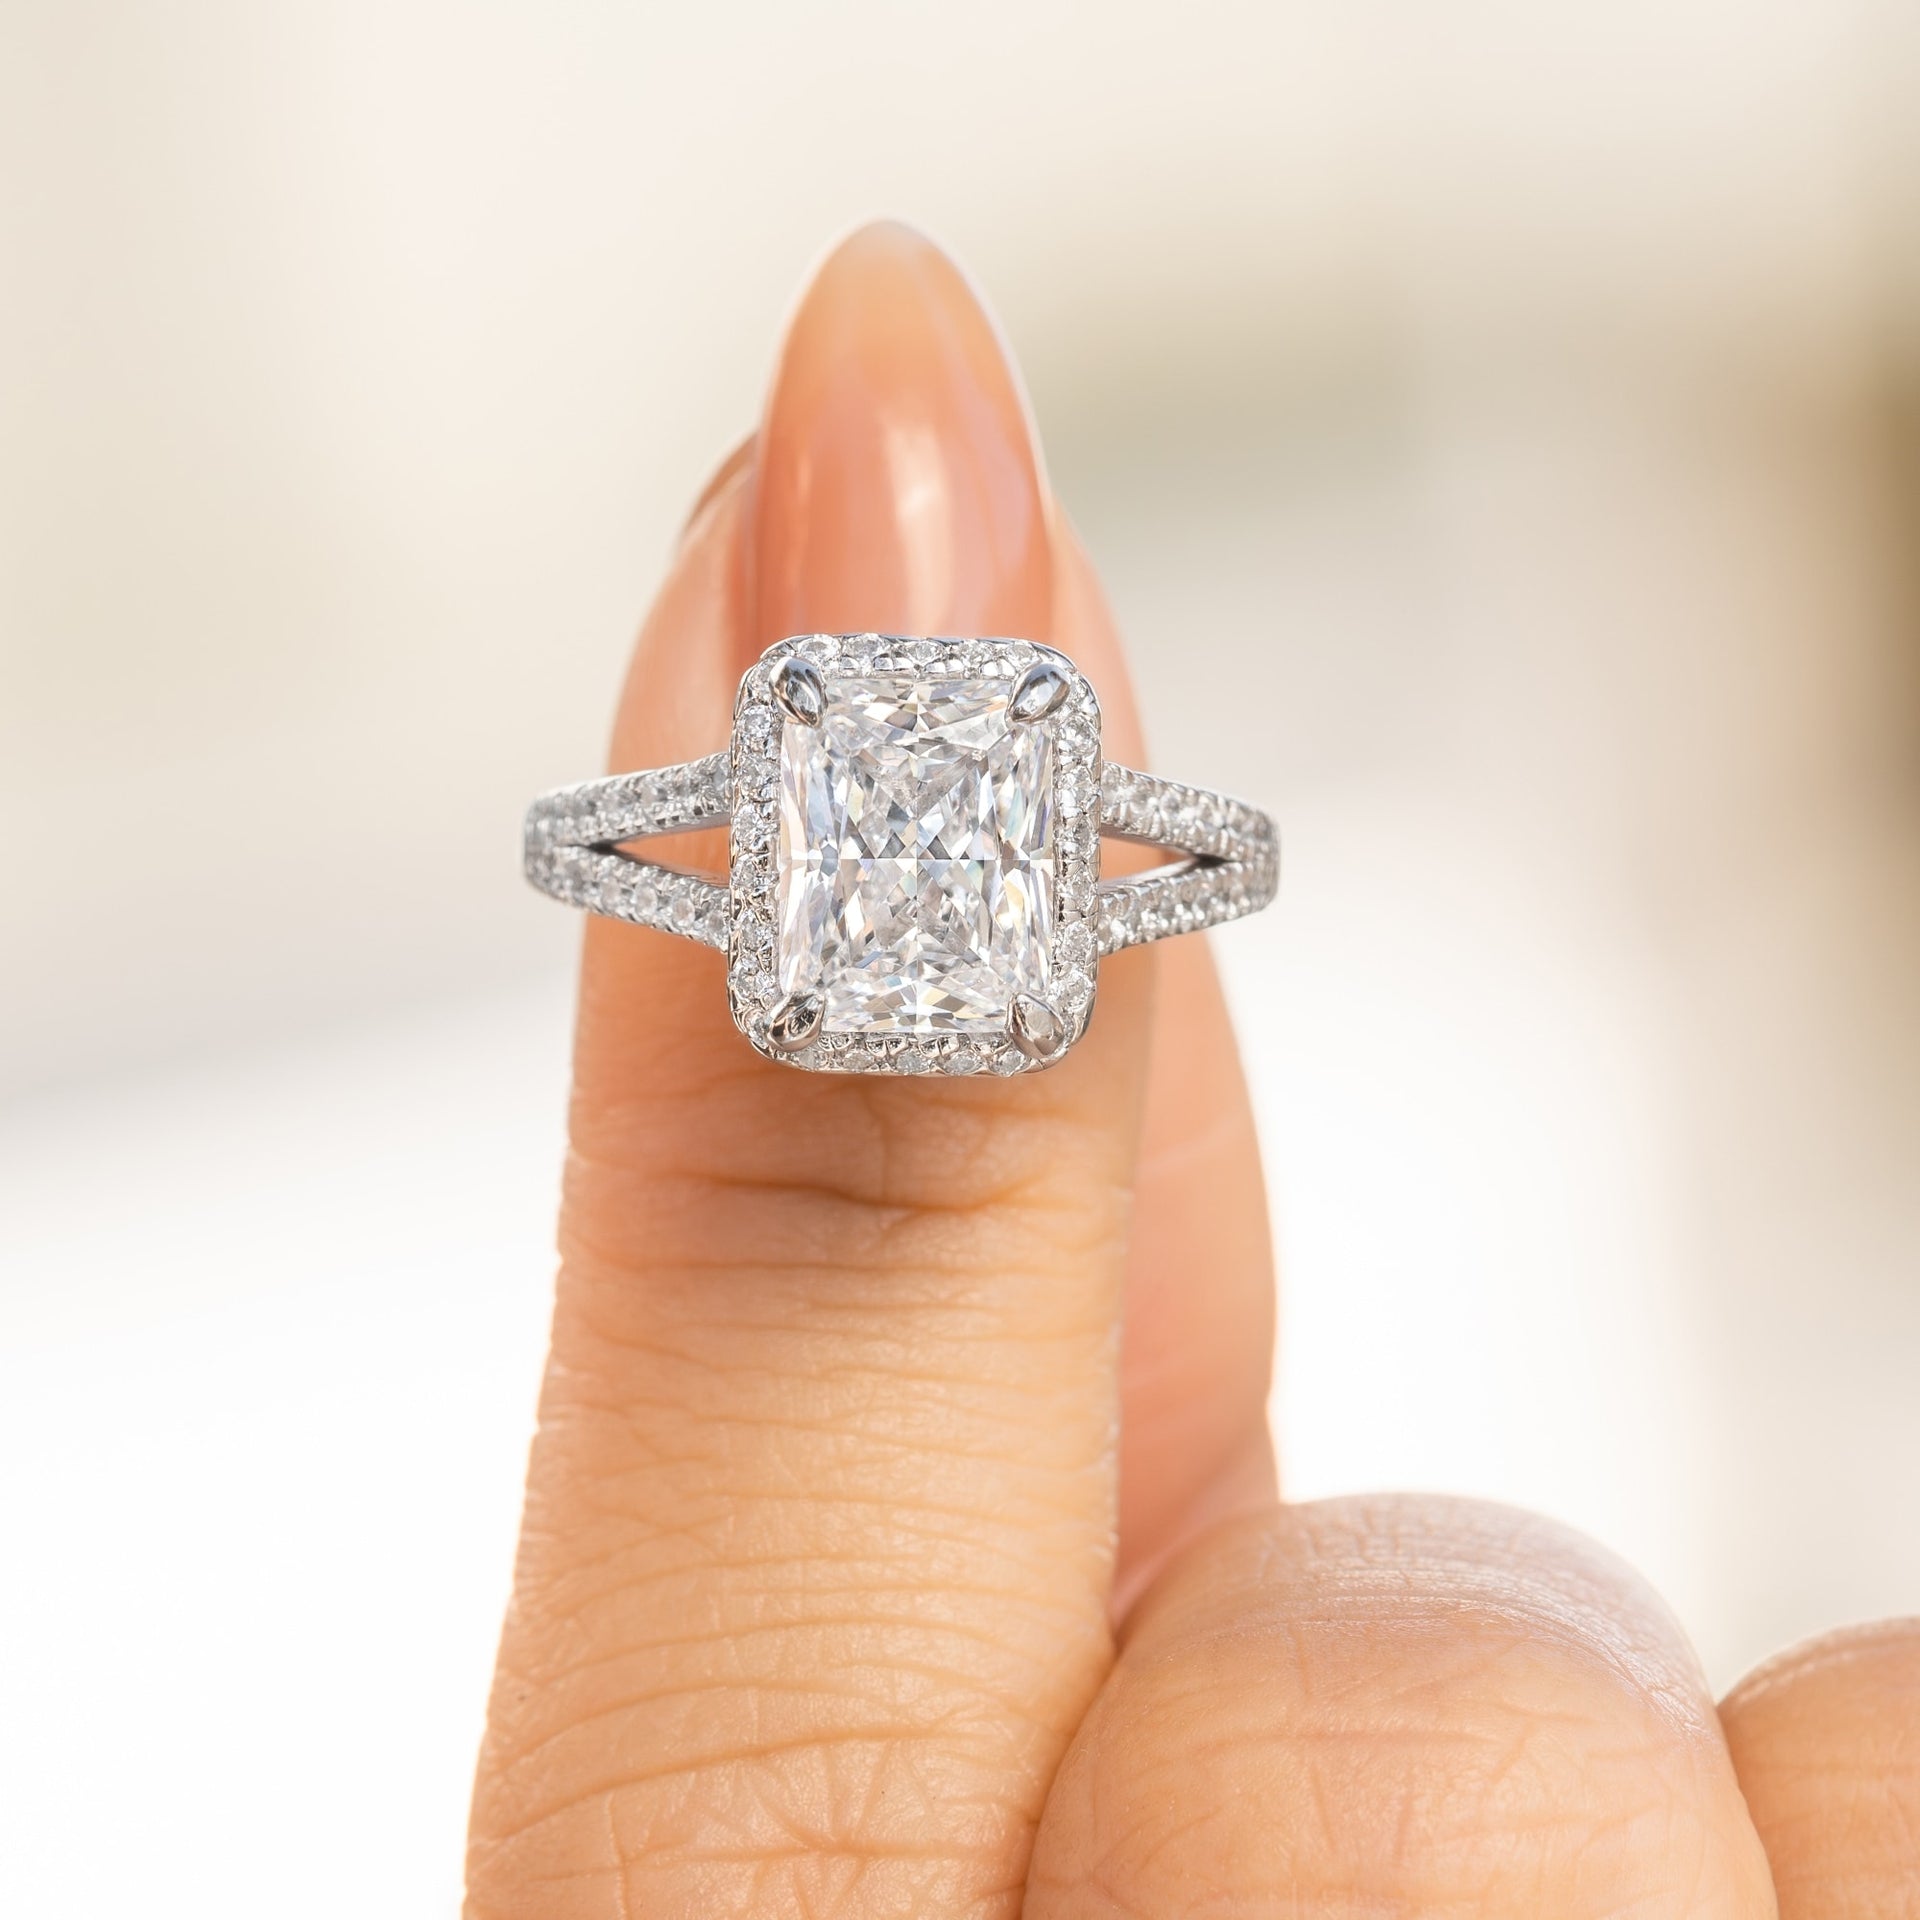 stunning 3.5 radiant cut engagement ring with halo and split shank detailing on female hand